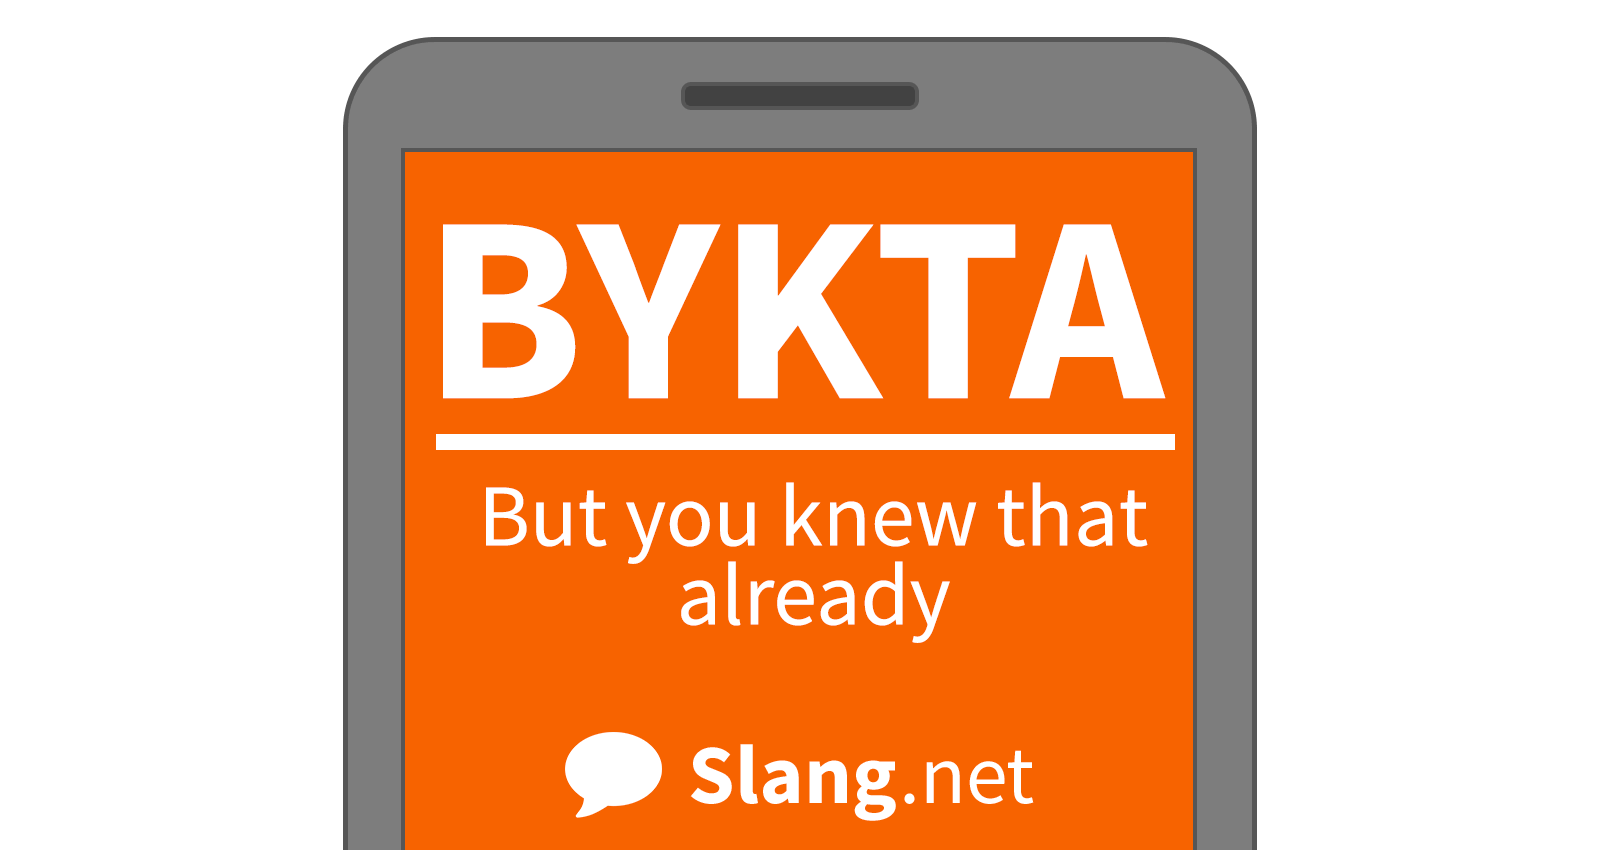 You will likely see BYKTA in messages